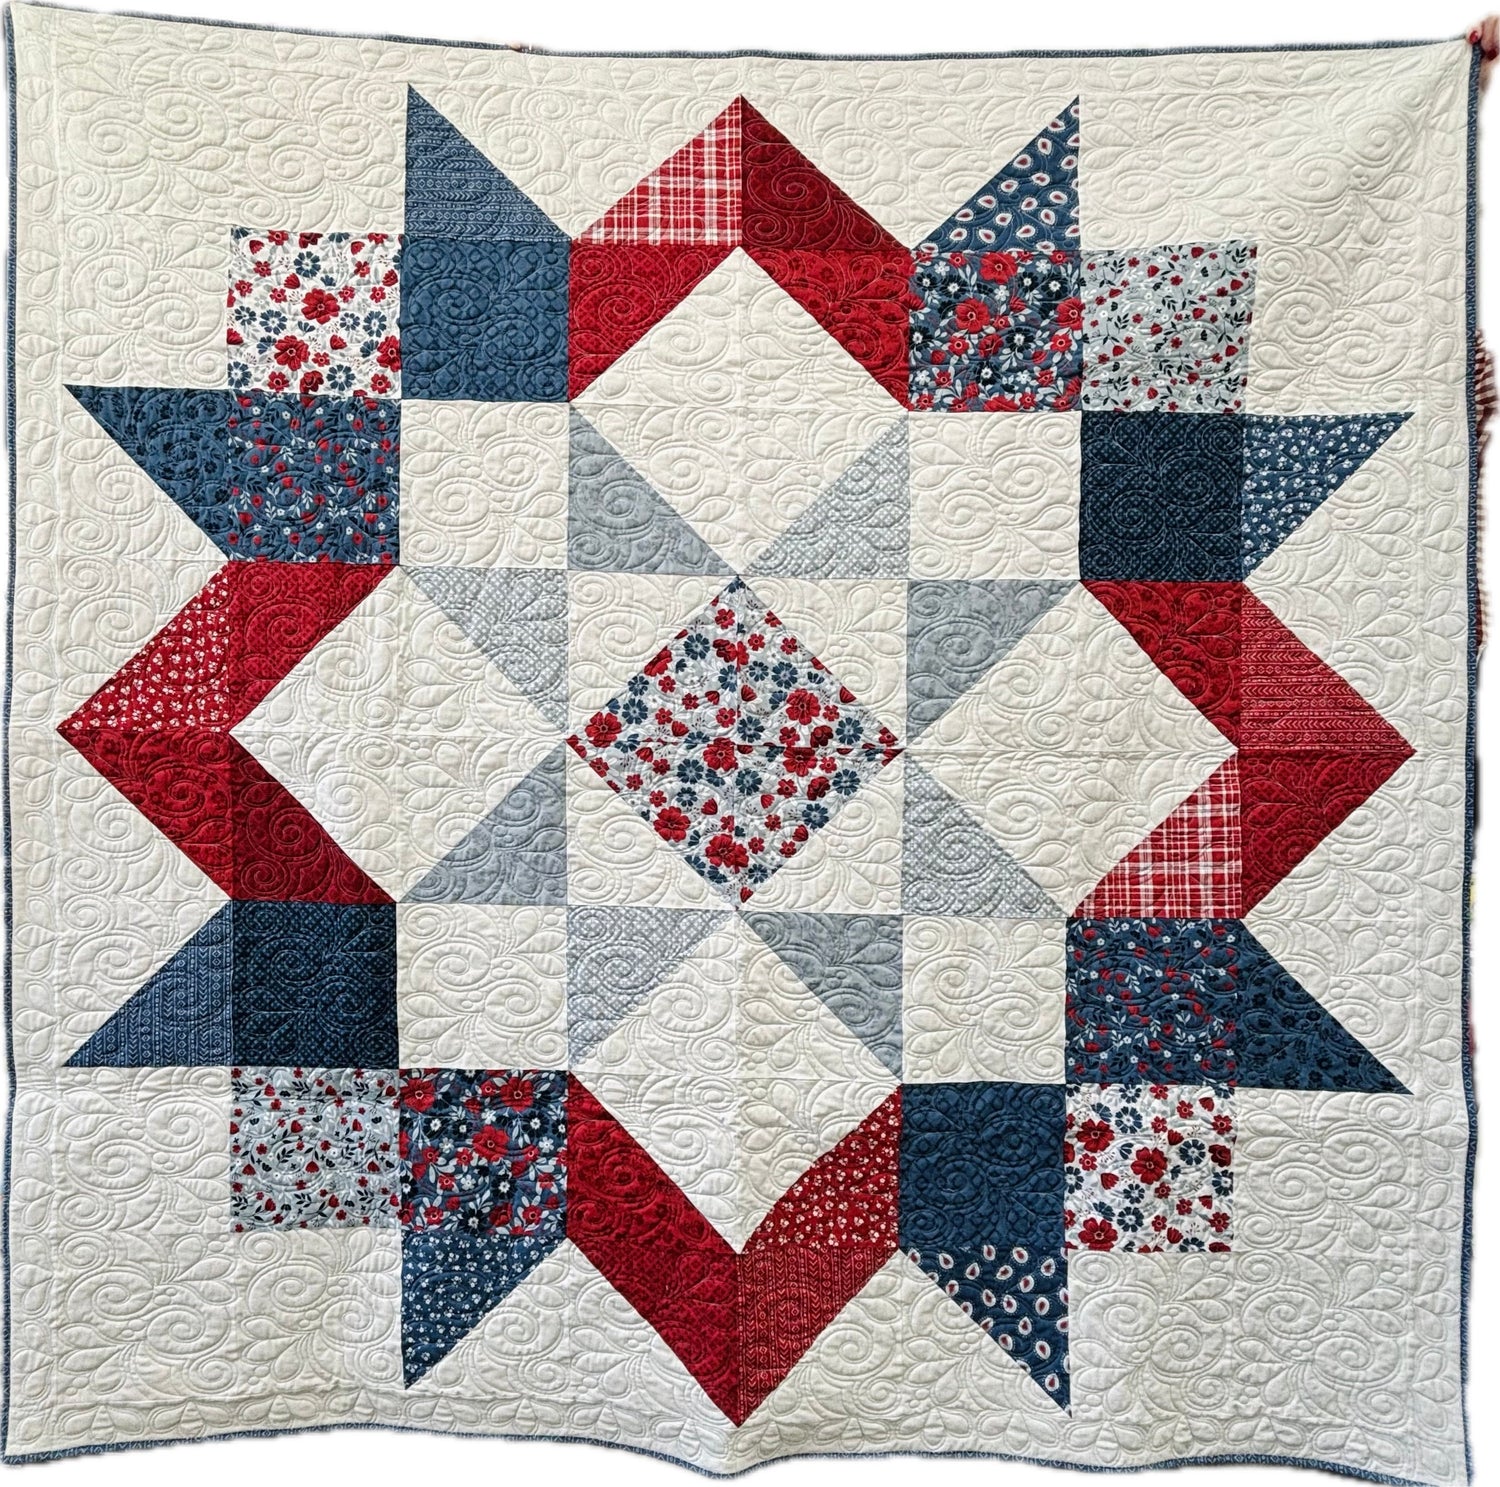 Moda Love Quilt Kit with American Beauty fabric by Dani Mogstad for Riley Blake Designs - quilt kit